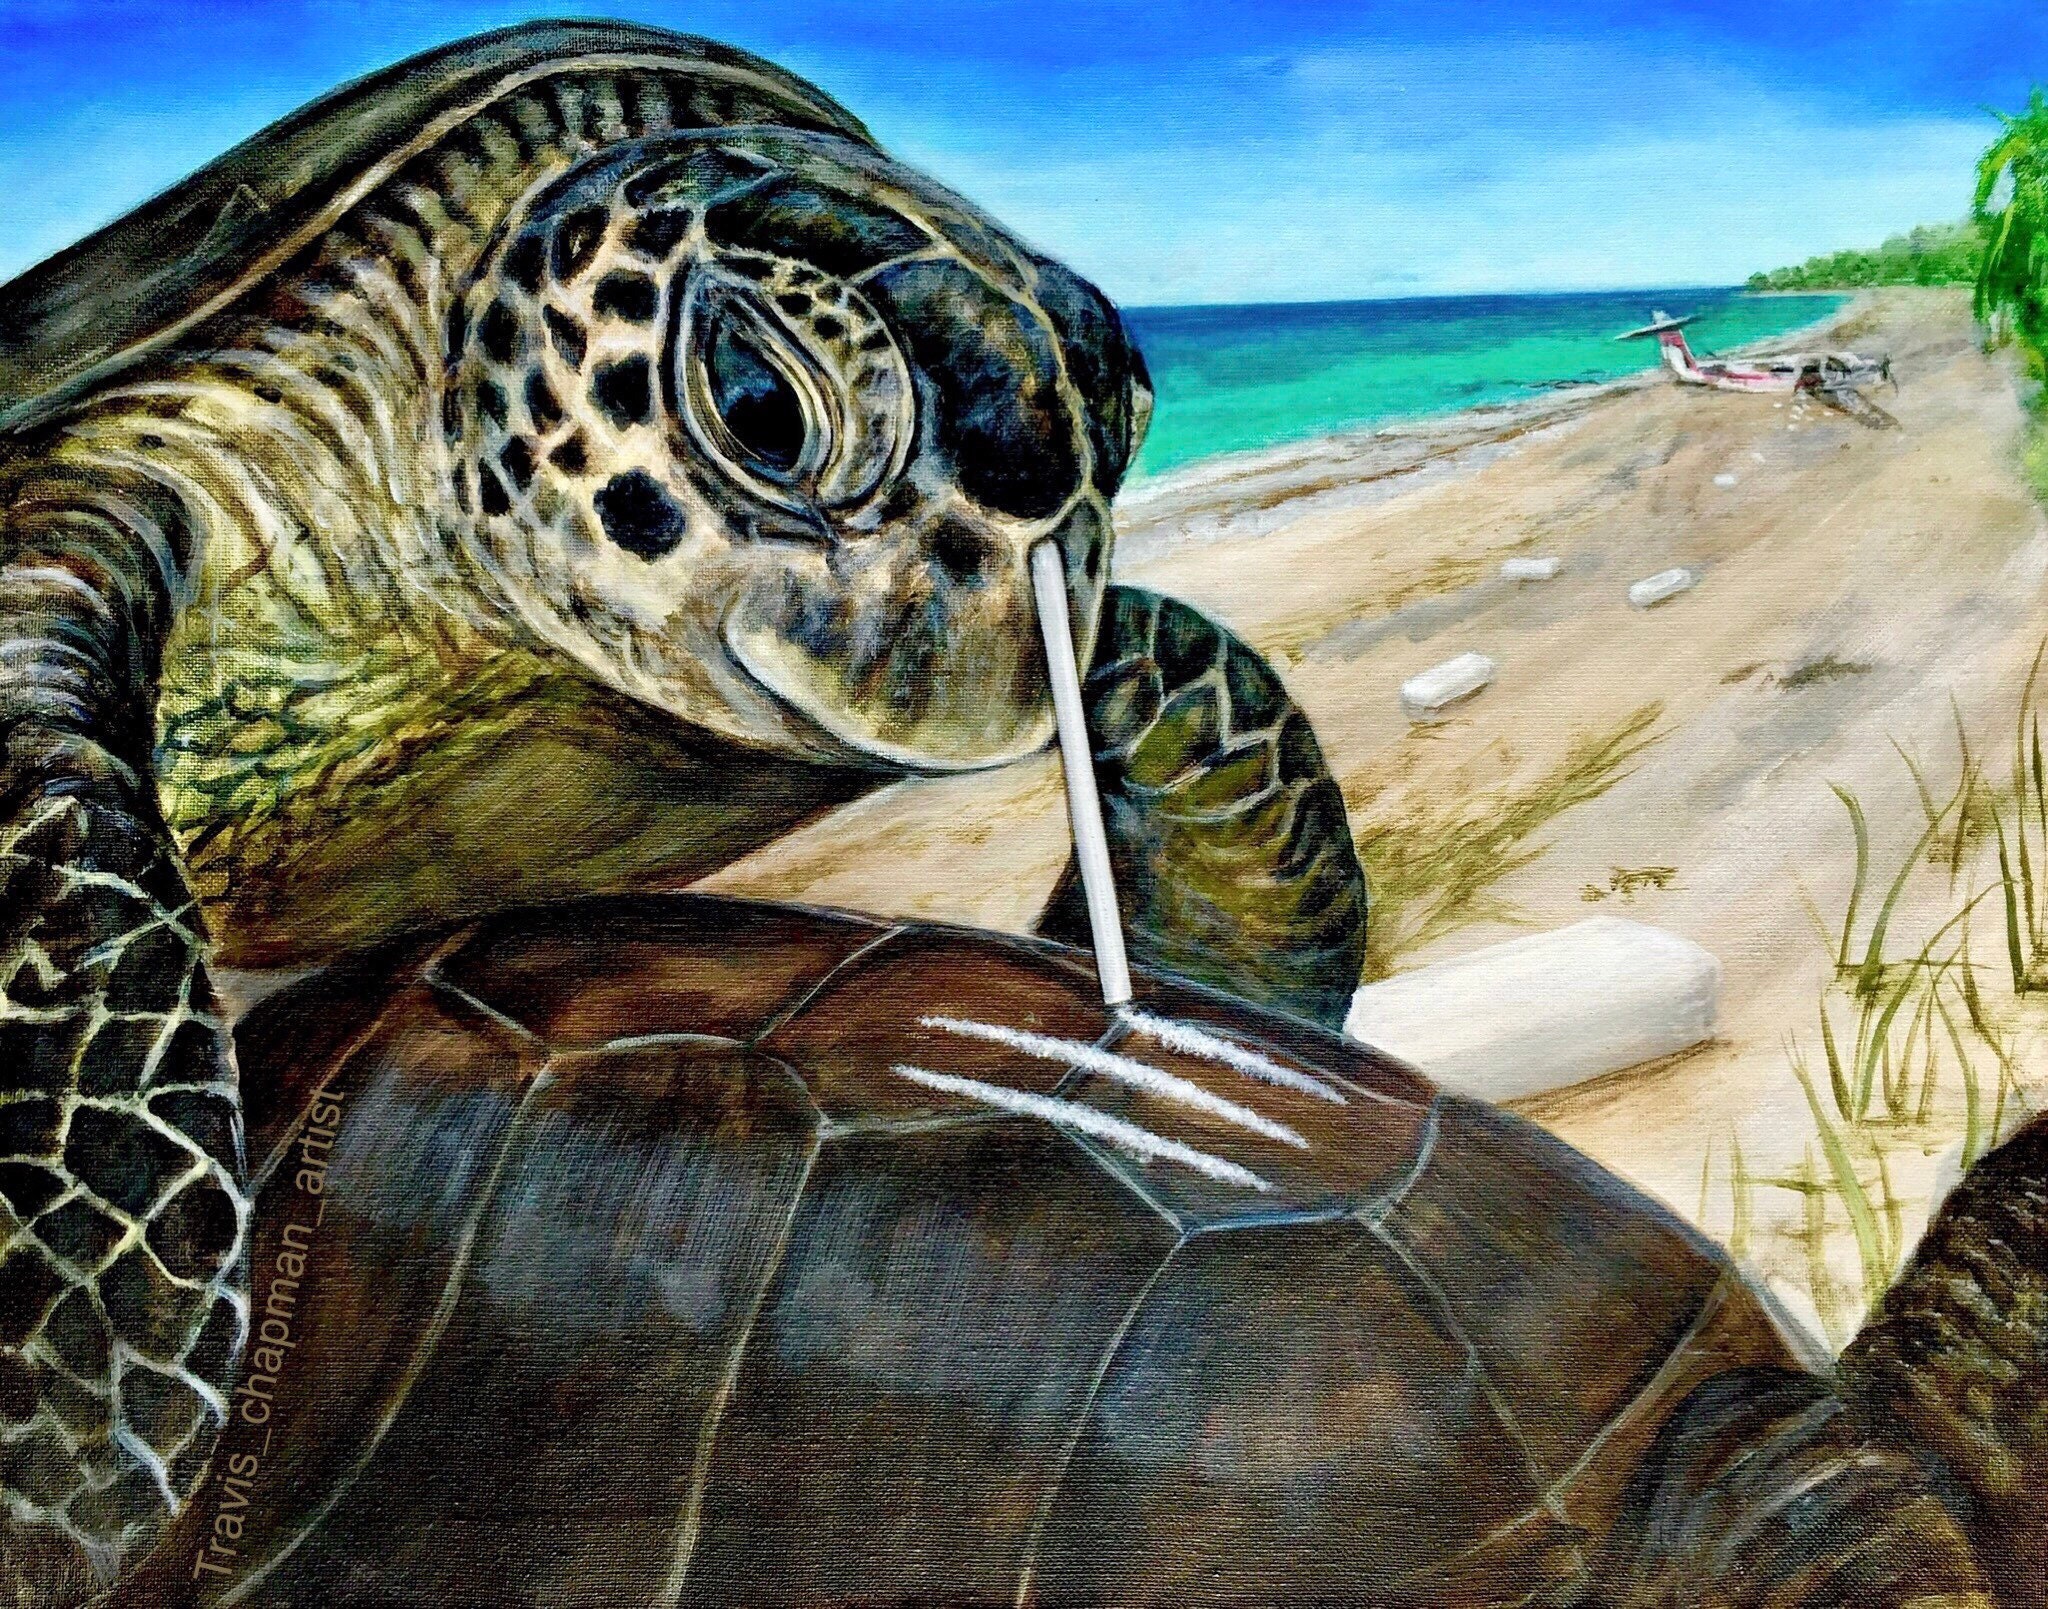 Video of a turtle having a drinking straw pulled from its nose in Costa  Rica